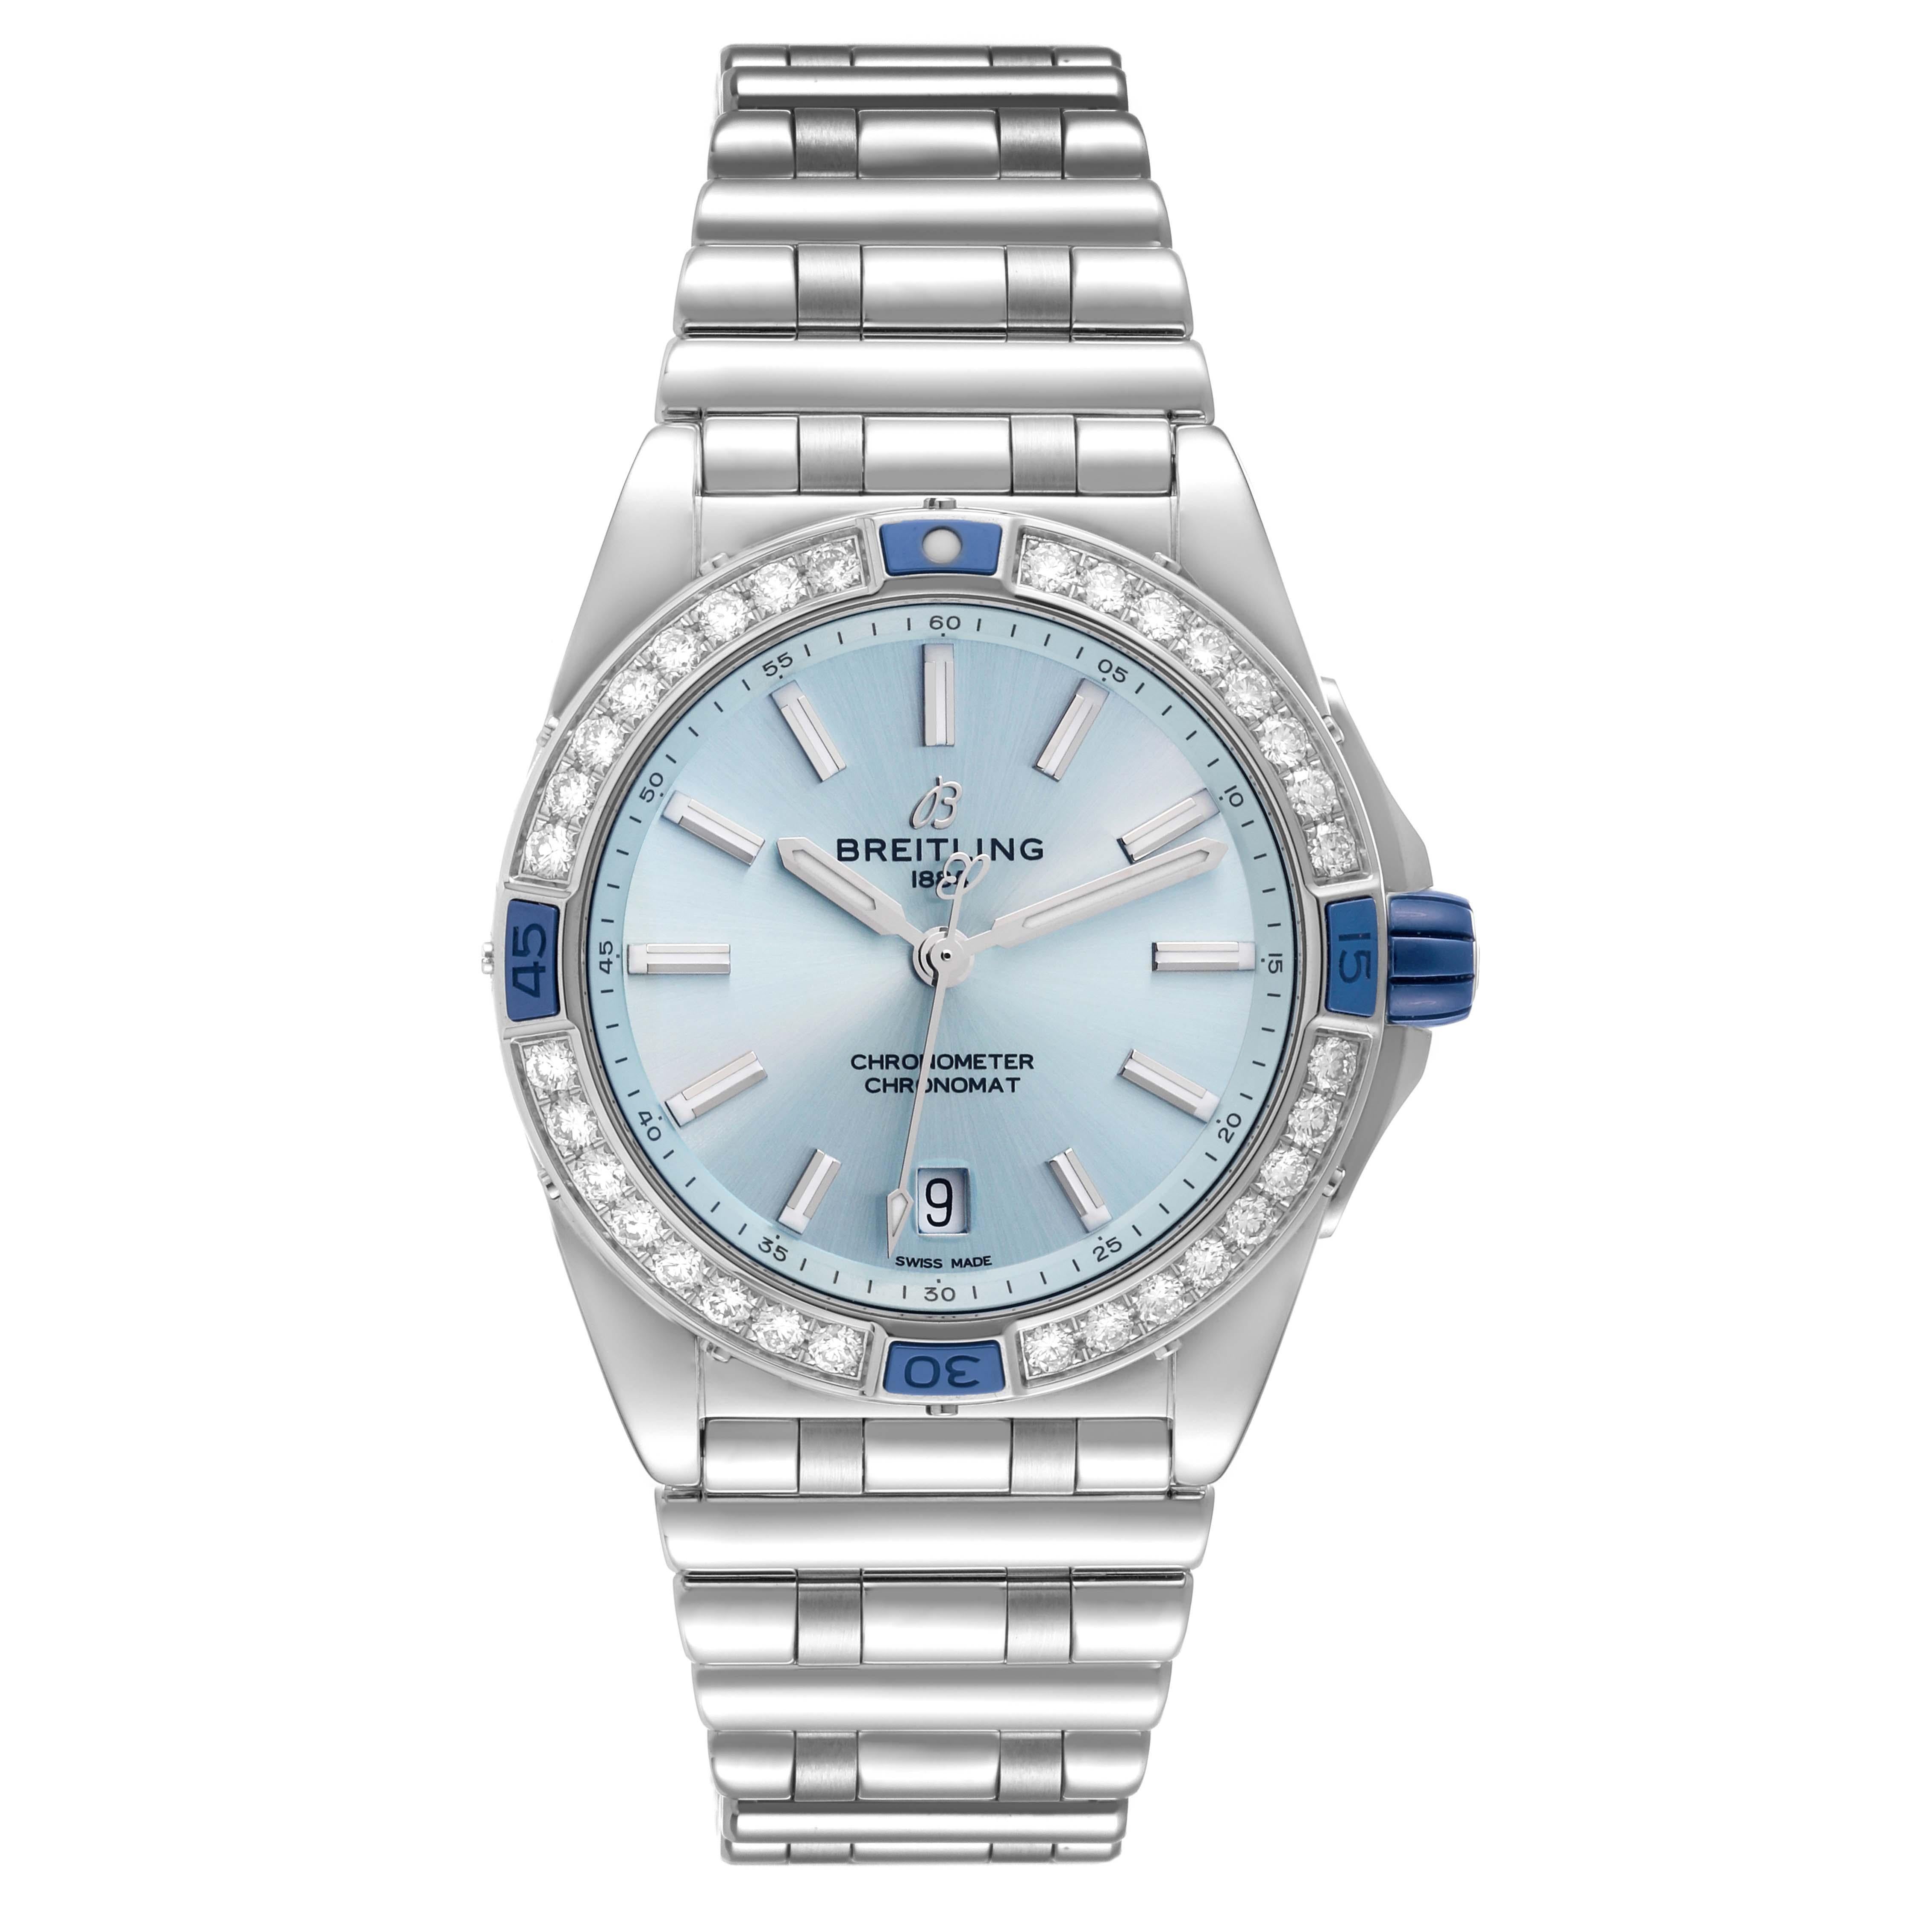 Breitling Super Chronomat Blue Dial Steel Diamond Ladies Watch A17356 Box Card. Automatic self-winding mechanical movement. Stainless steel case 38.0 mm in diameter. Original Breitling factory unidirectional rotating diamond bezel. Four 15 minute